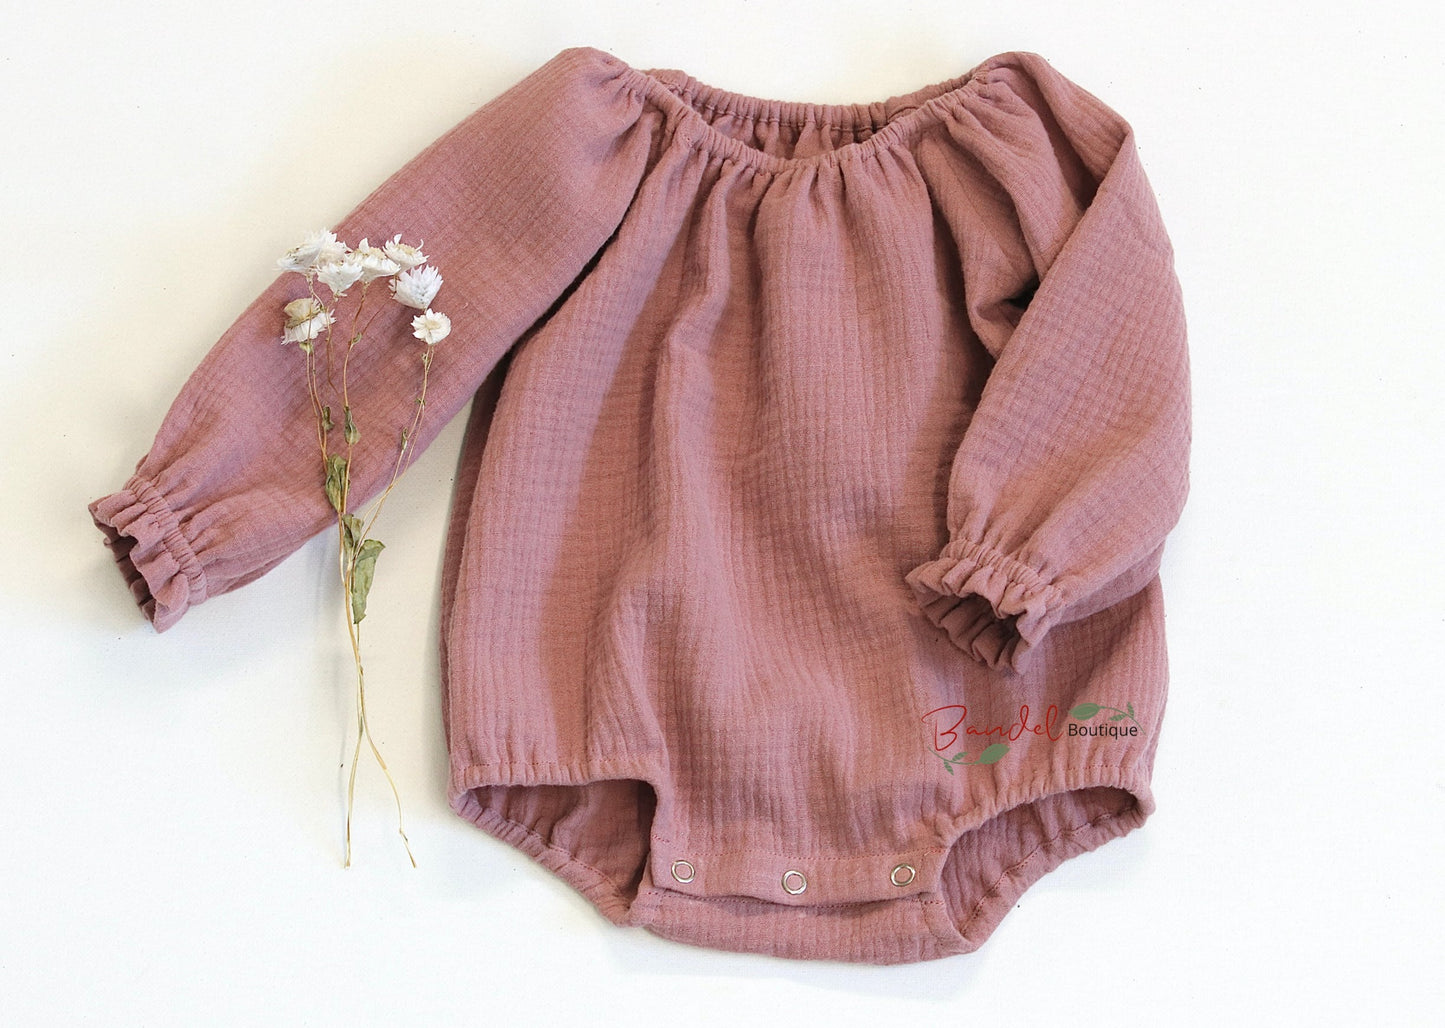 Handmade old- rose minimalist newborn baby romper with long sleeves, made from breathable and soft double gauze organic fabric. Features elasticized openings and crotch snaps for easy dressing and maximum comfort. 